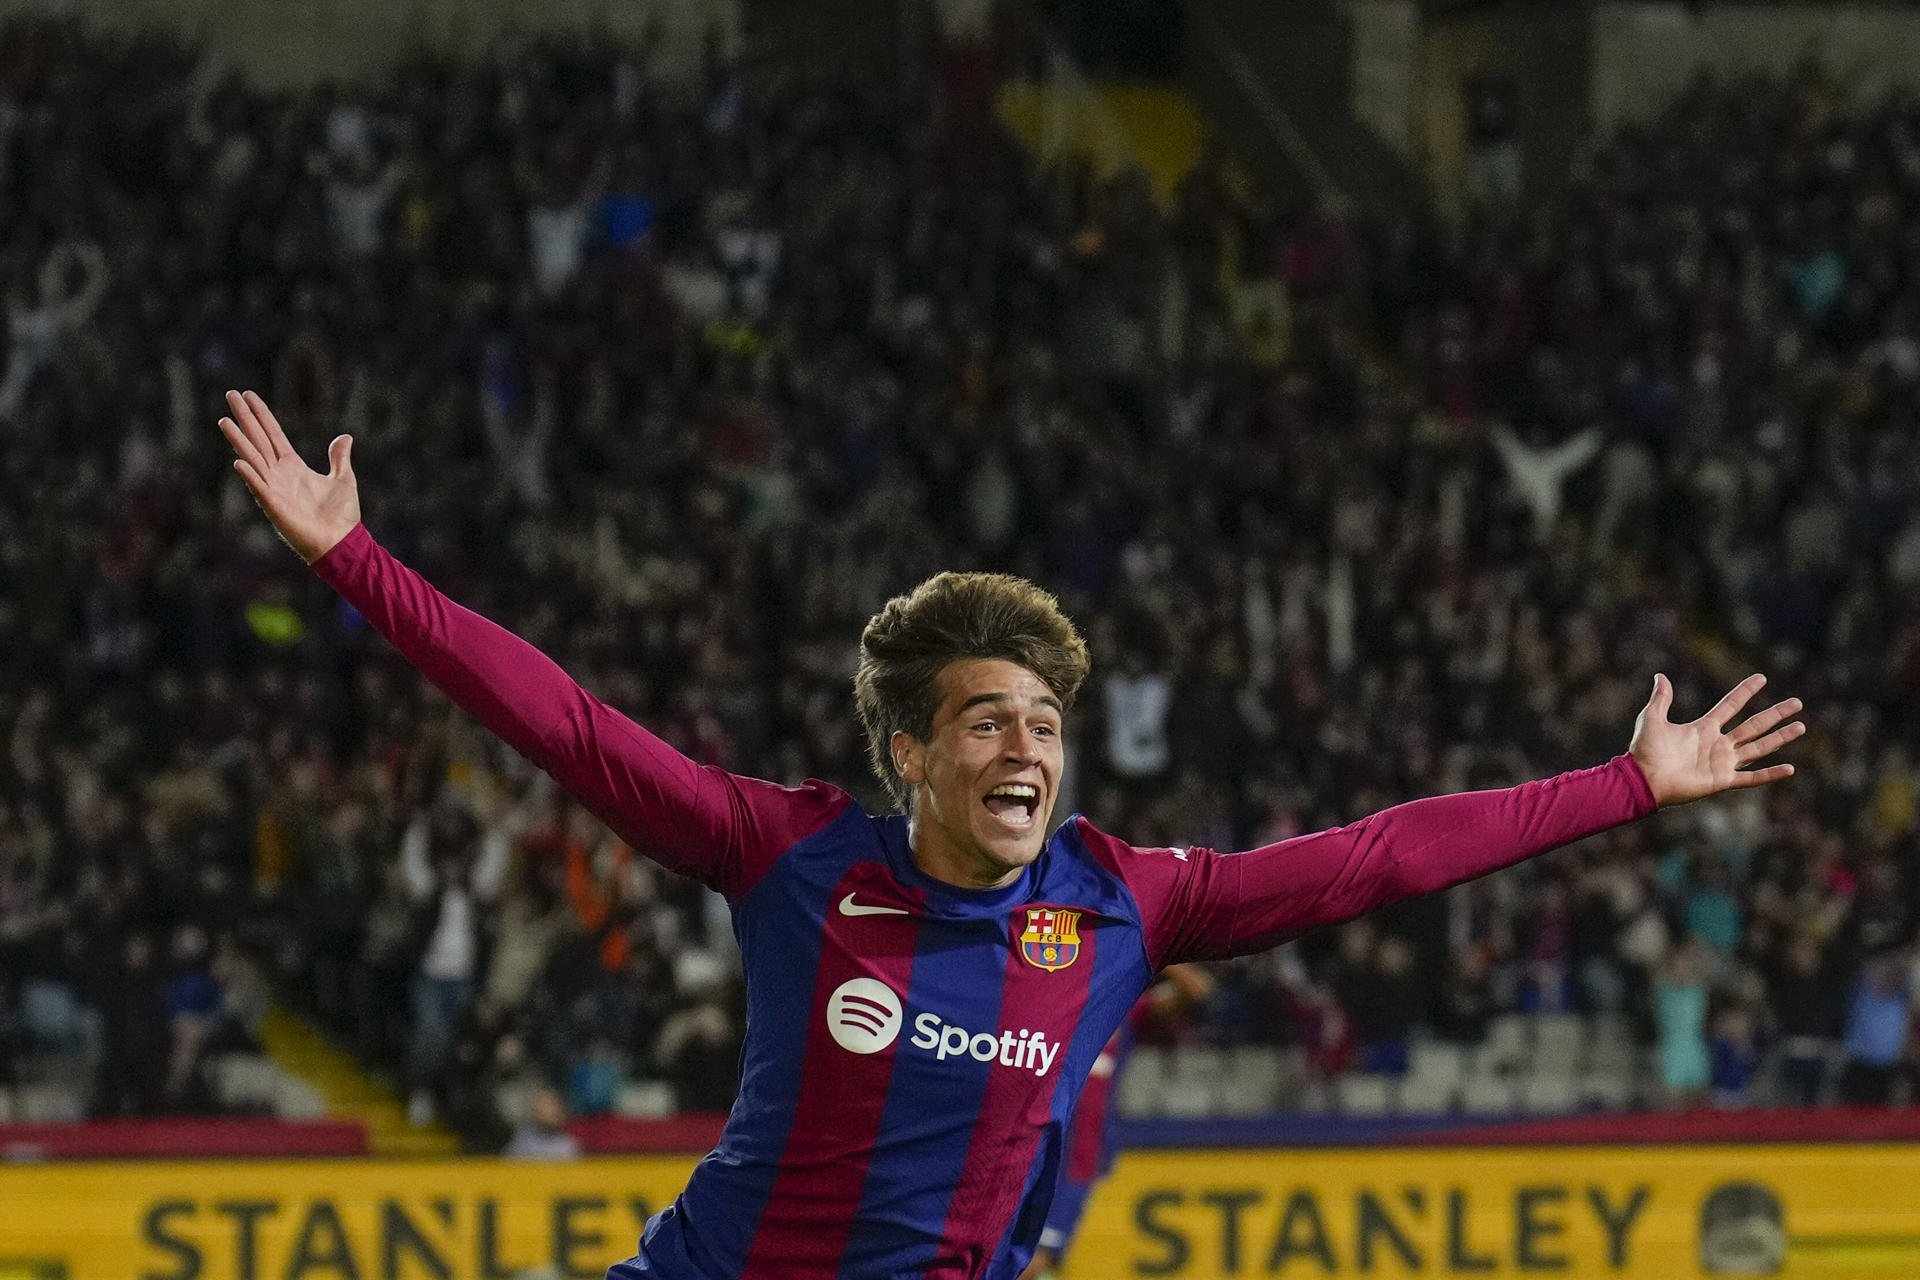 This is Marc Guiu: Barça's latest teenage sensation with an historic goal